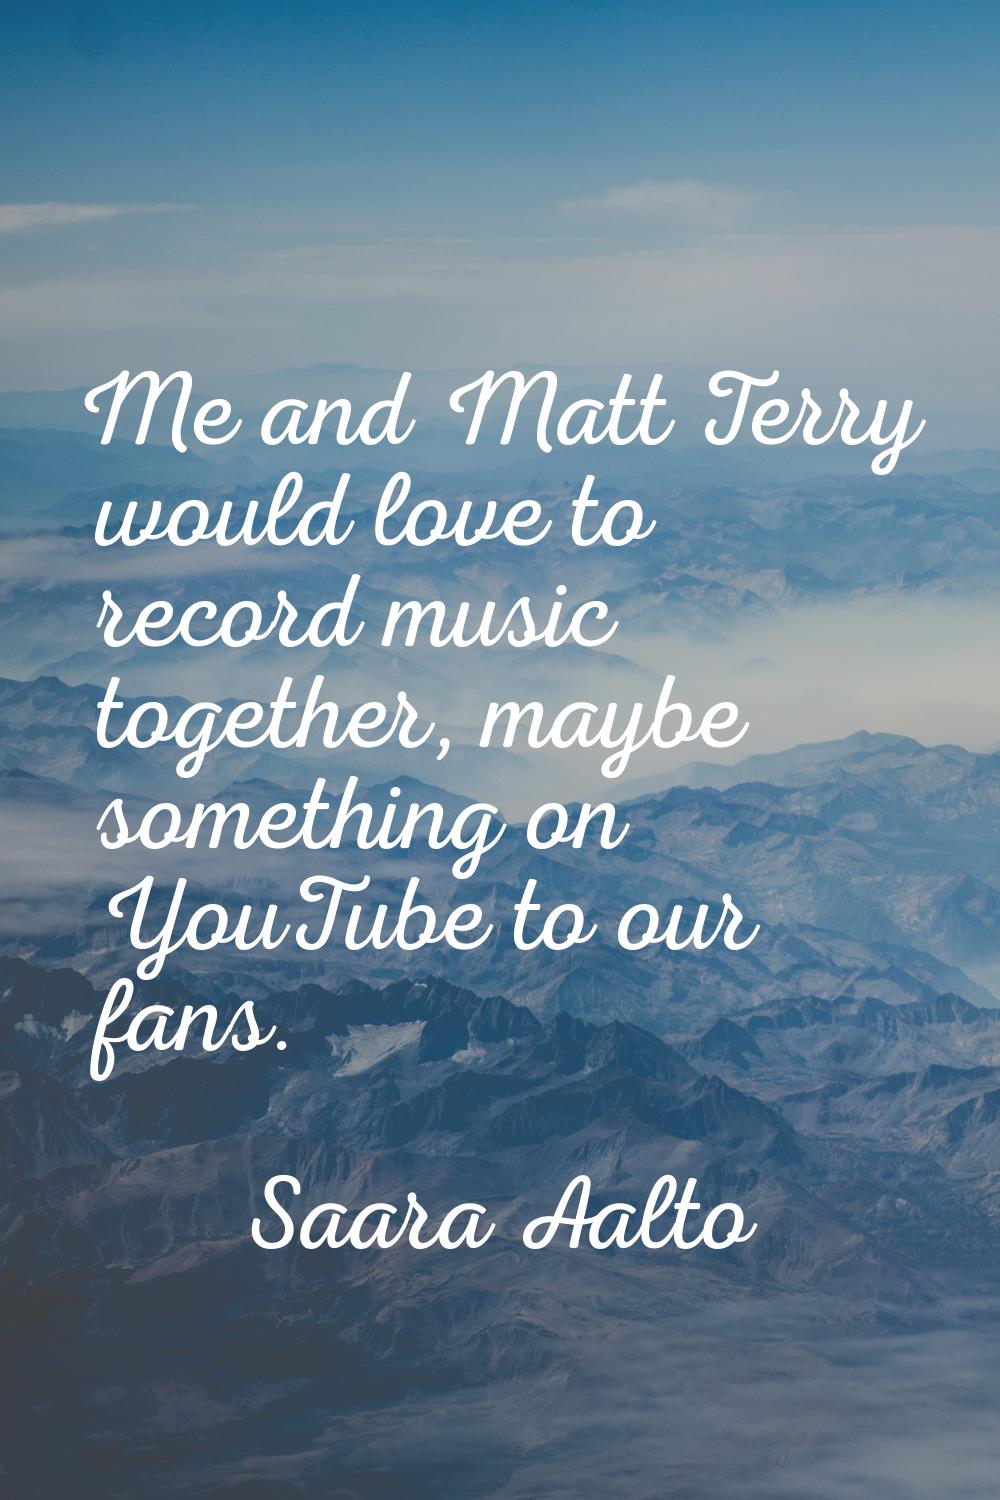 Me and Matt Terry would love to record music together, maybe something on YouTube to our fans.